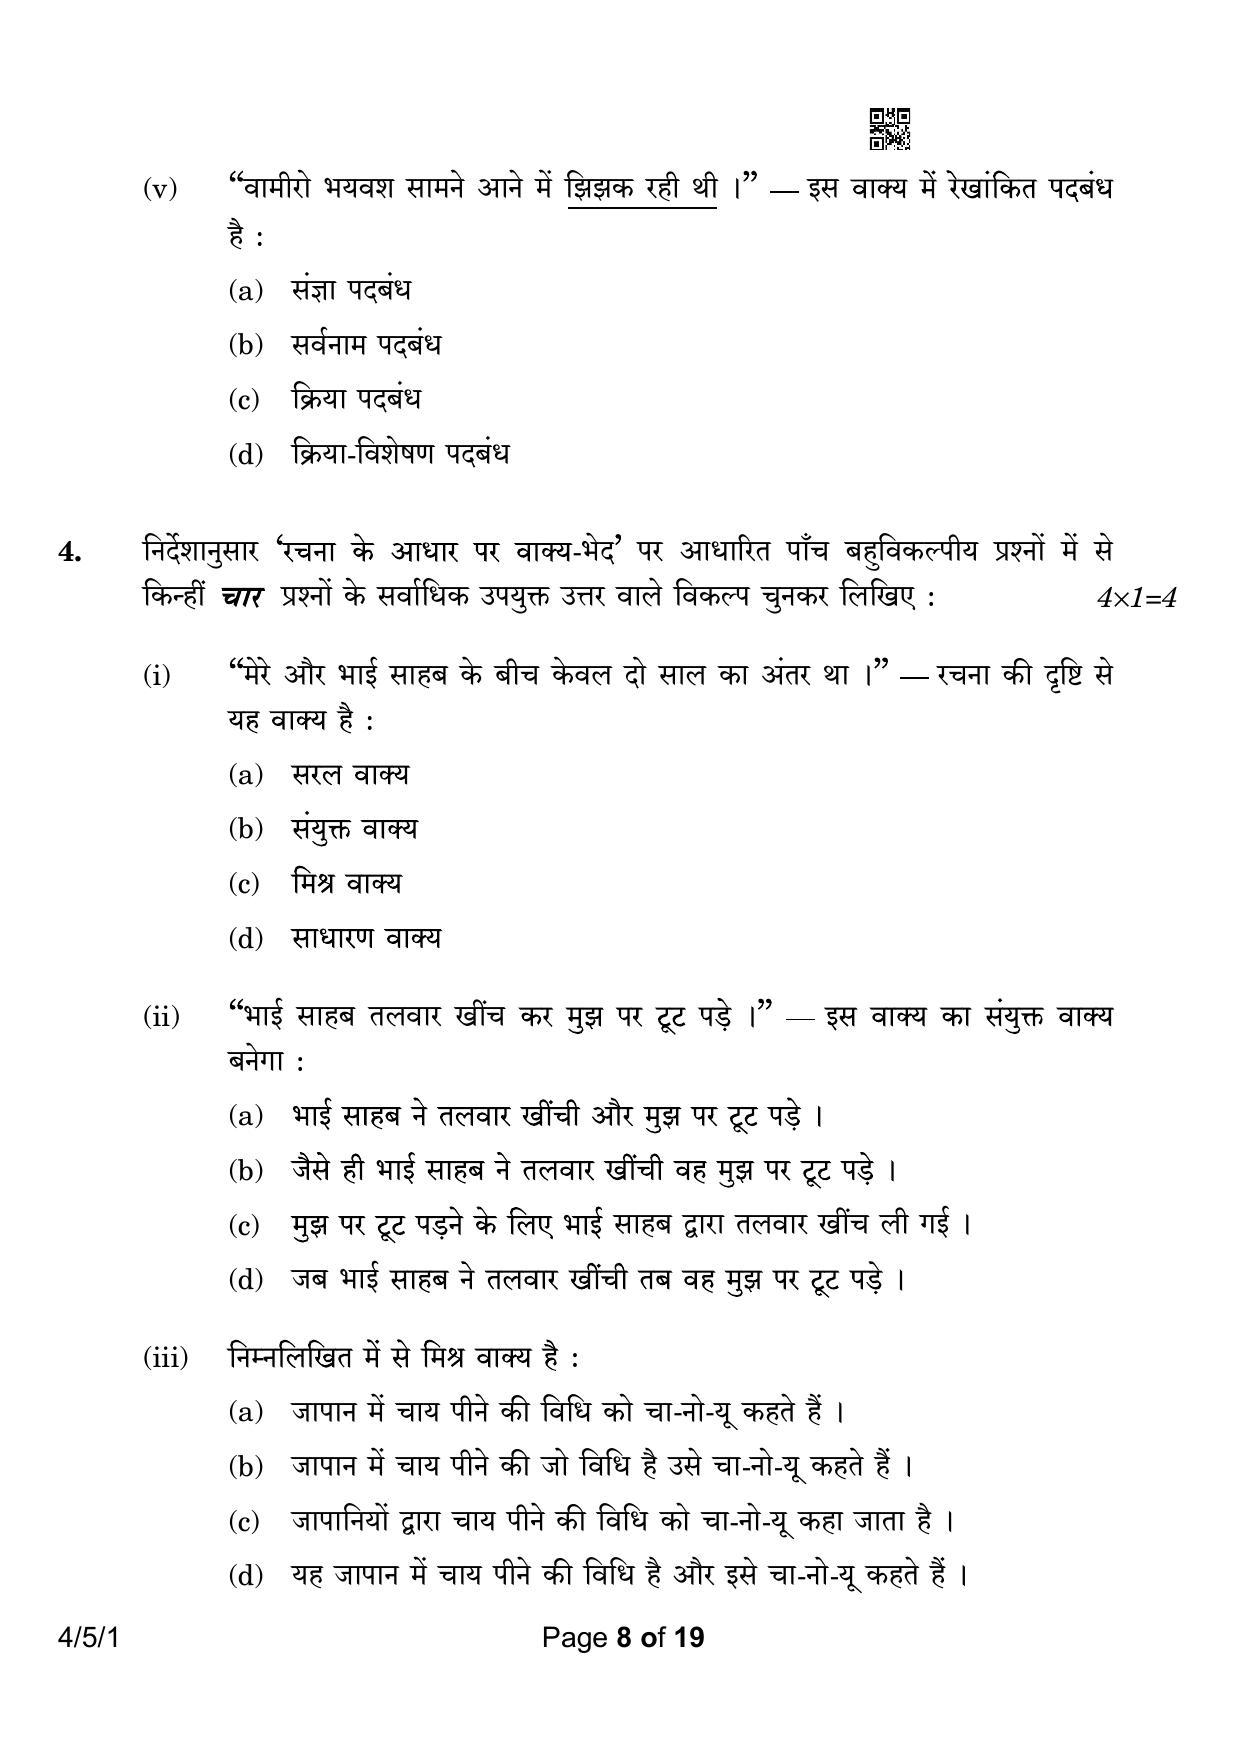 CBSE Class 10 4-5-1 Hindi B 2023 Question Paper - Page 8